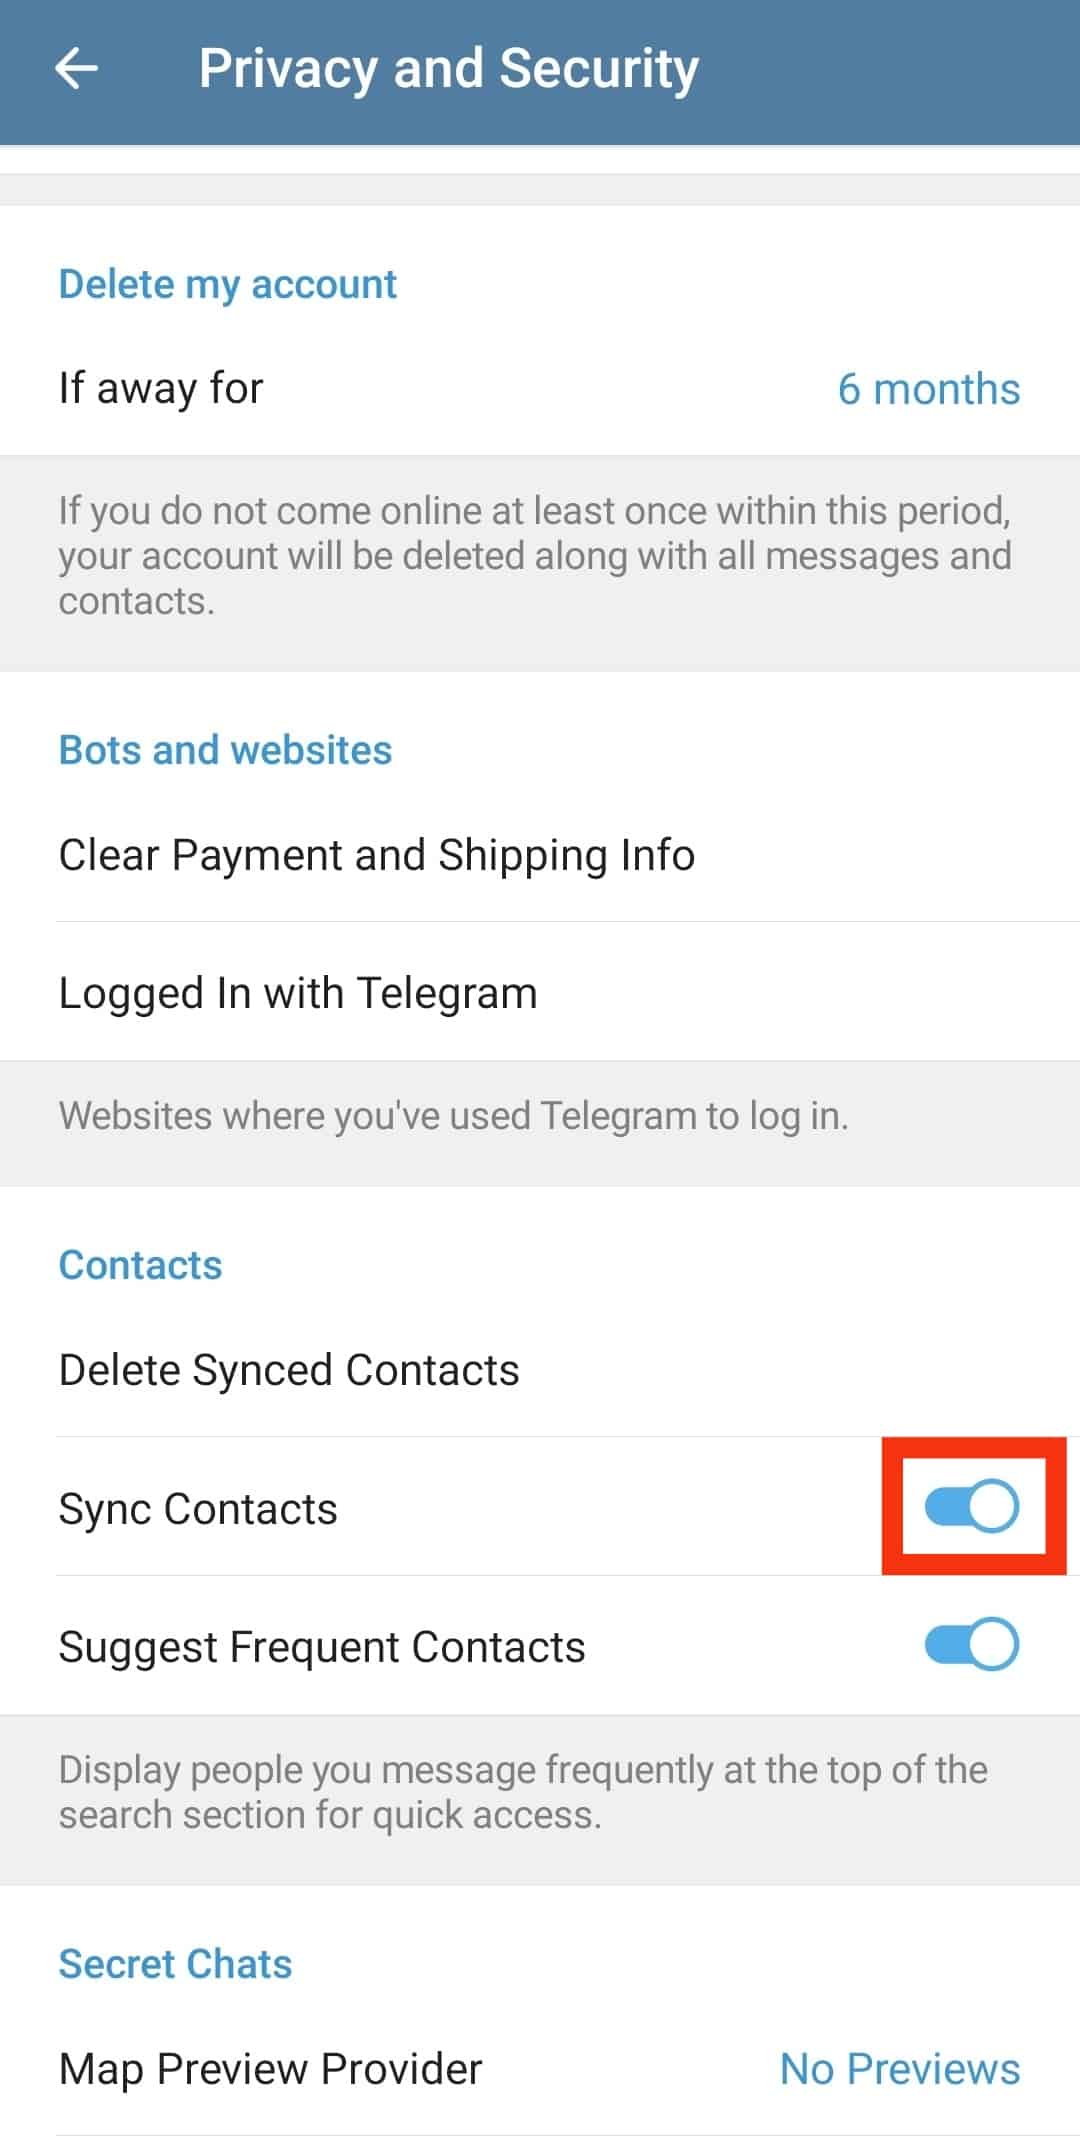 Turn On The Sync Contacts Toggle